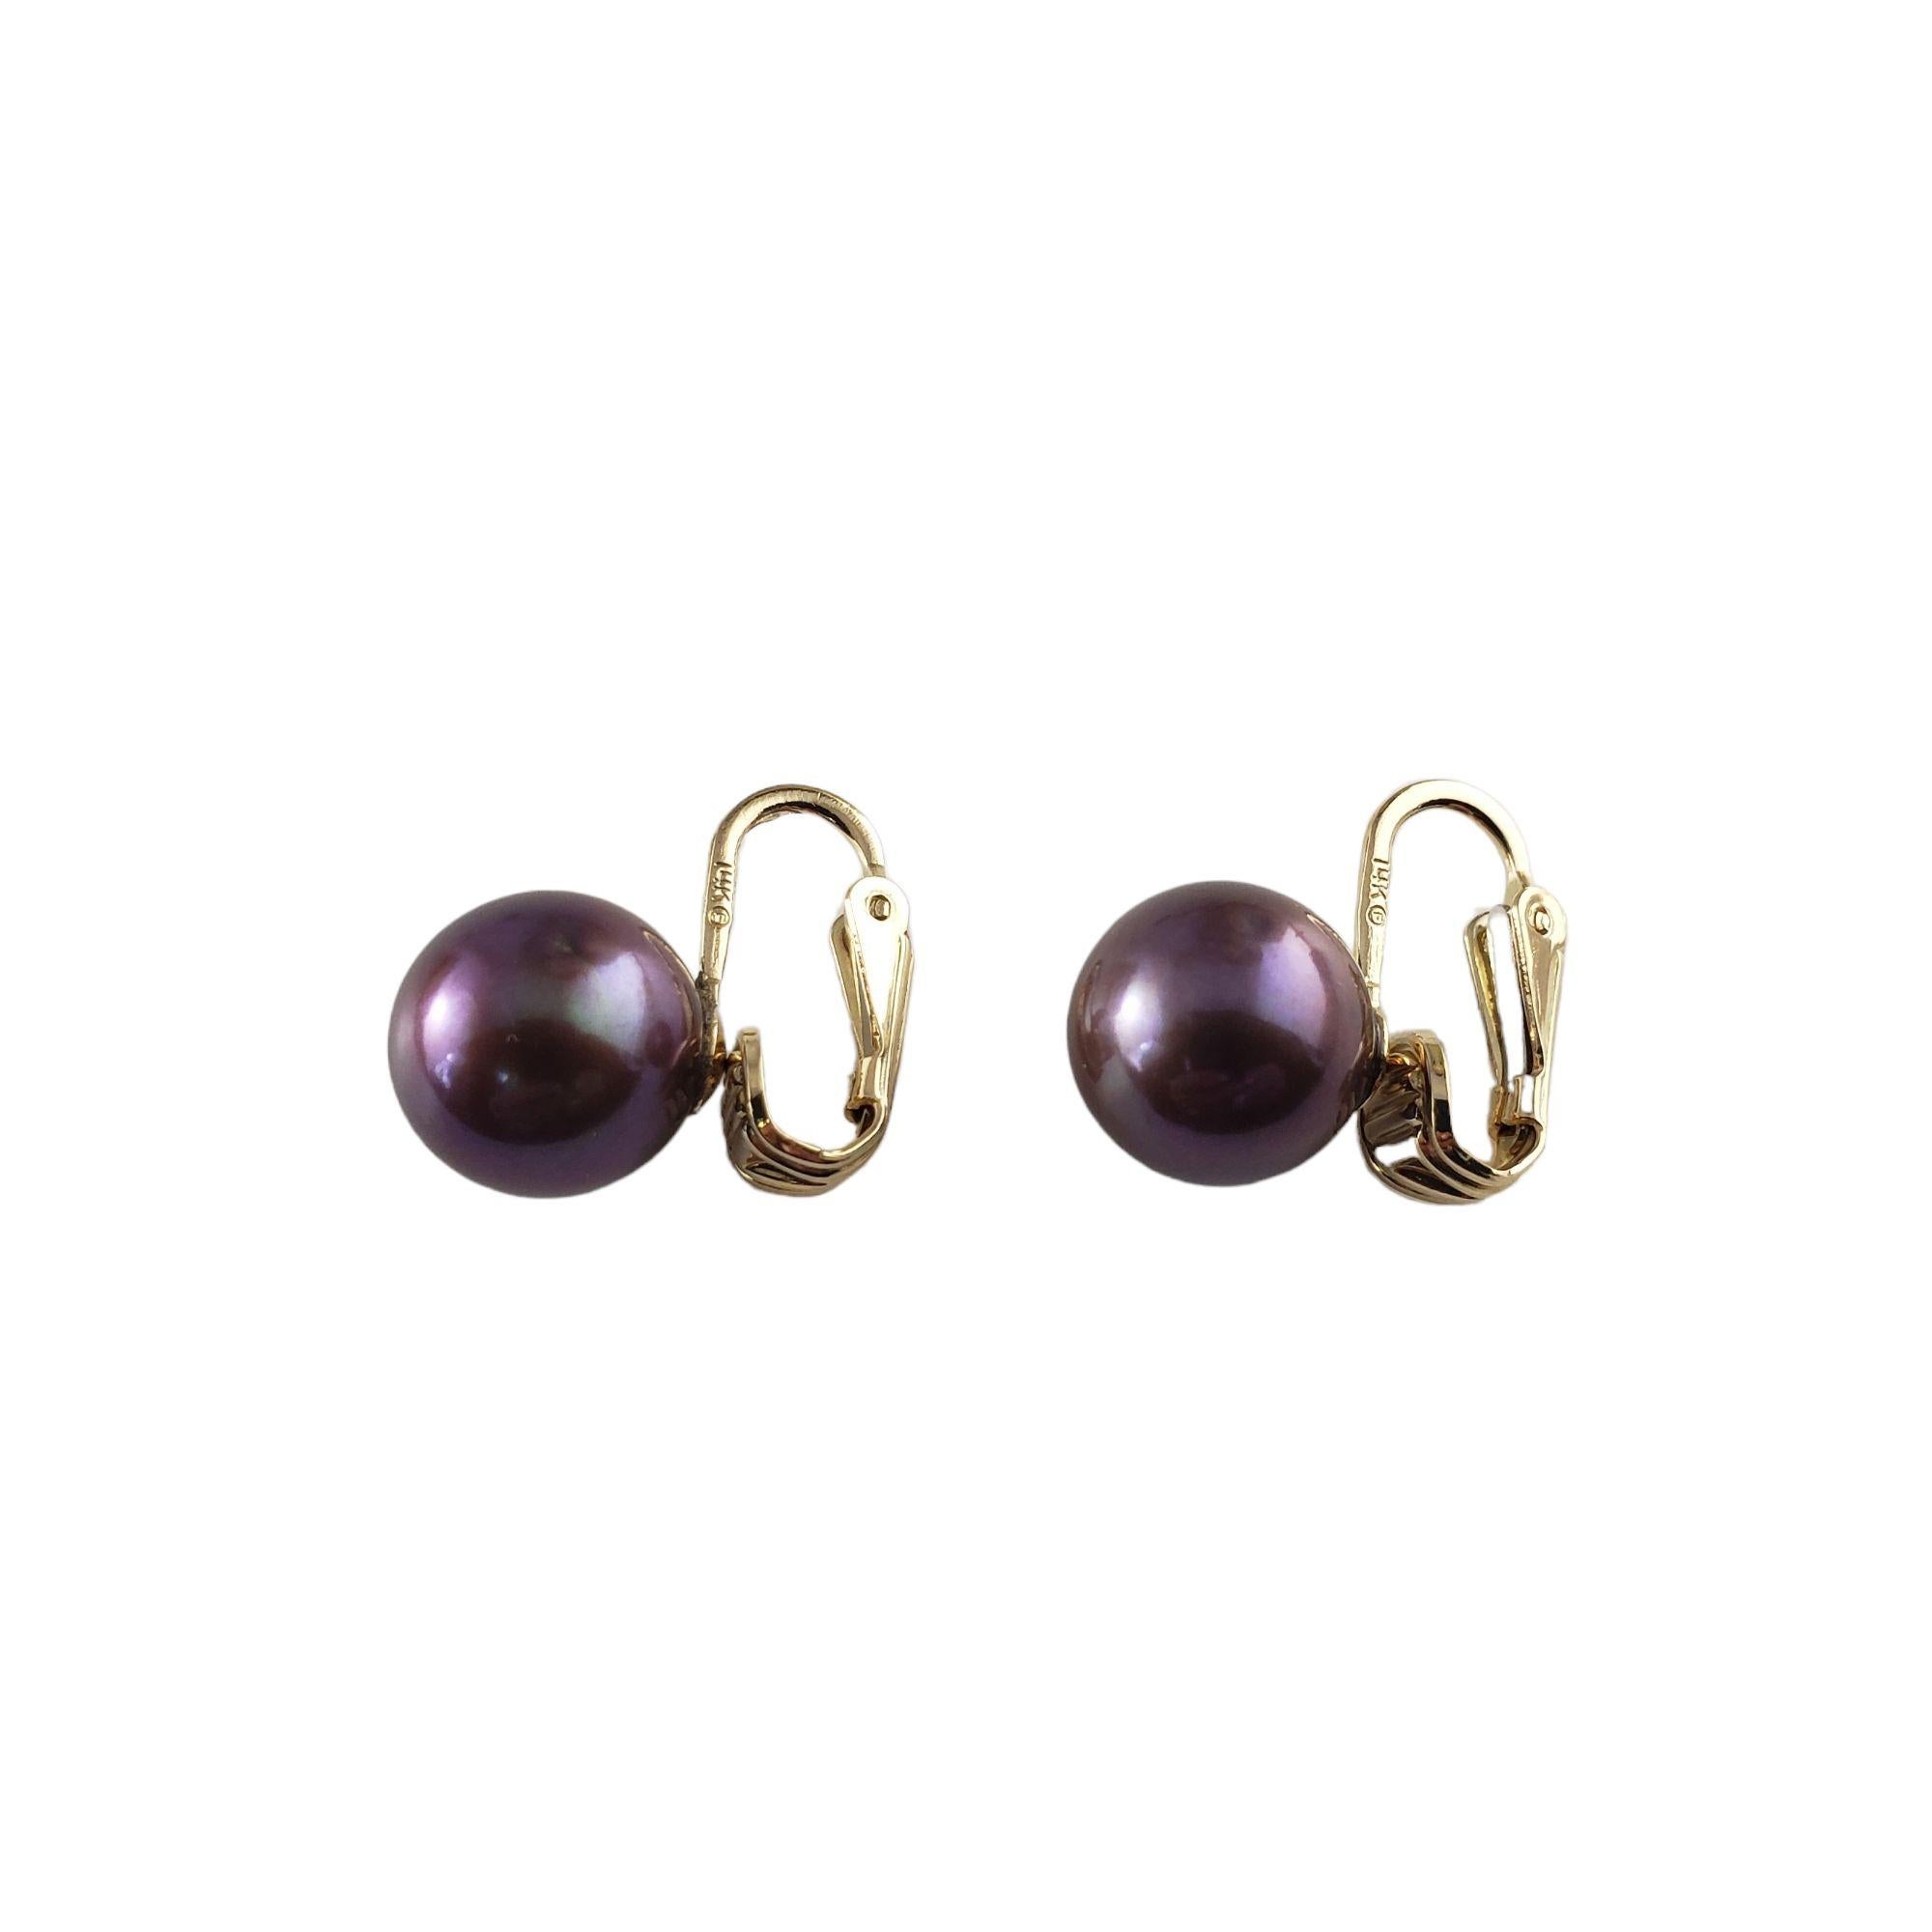 Vintage 14 Karat Yellow Gold and Black Pearl Clip On Earrings-

These lovely earrings each feature one black pearl (11 mm) set in classic 14K yellow gold. Clip on closures.

Size: 17 mm x 11 mm

Weight: 3.4 dwt. / 5.3 gr.

Stamped: 14K

Very good